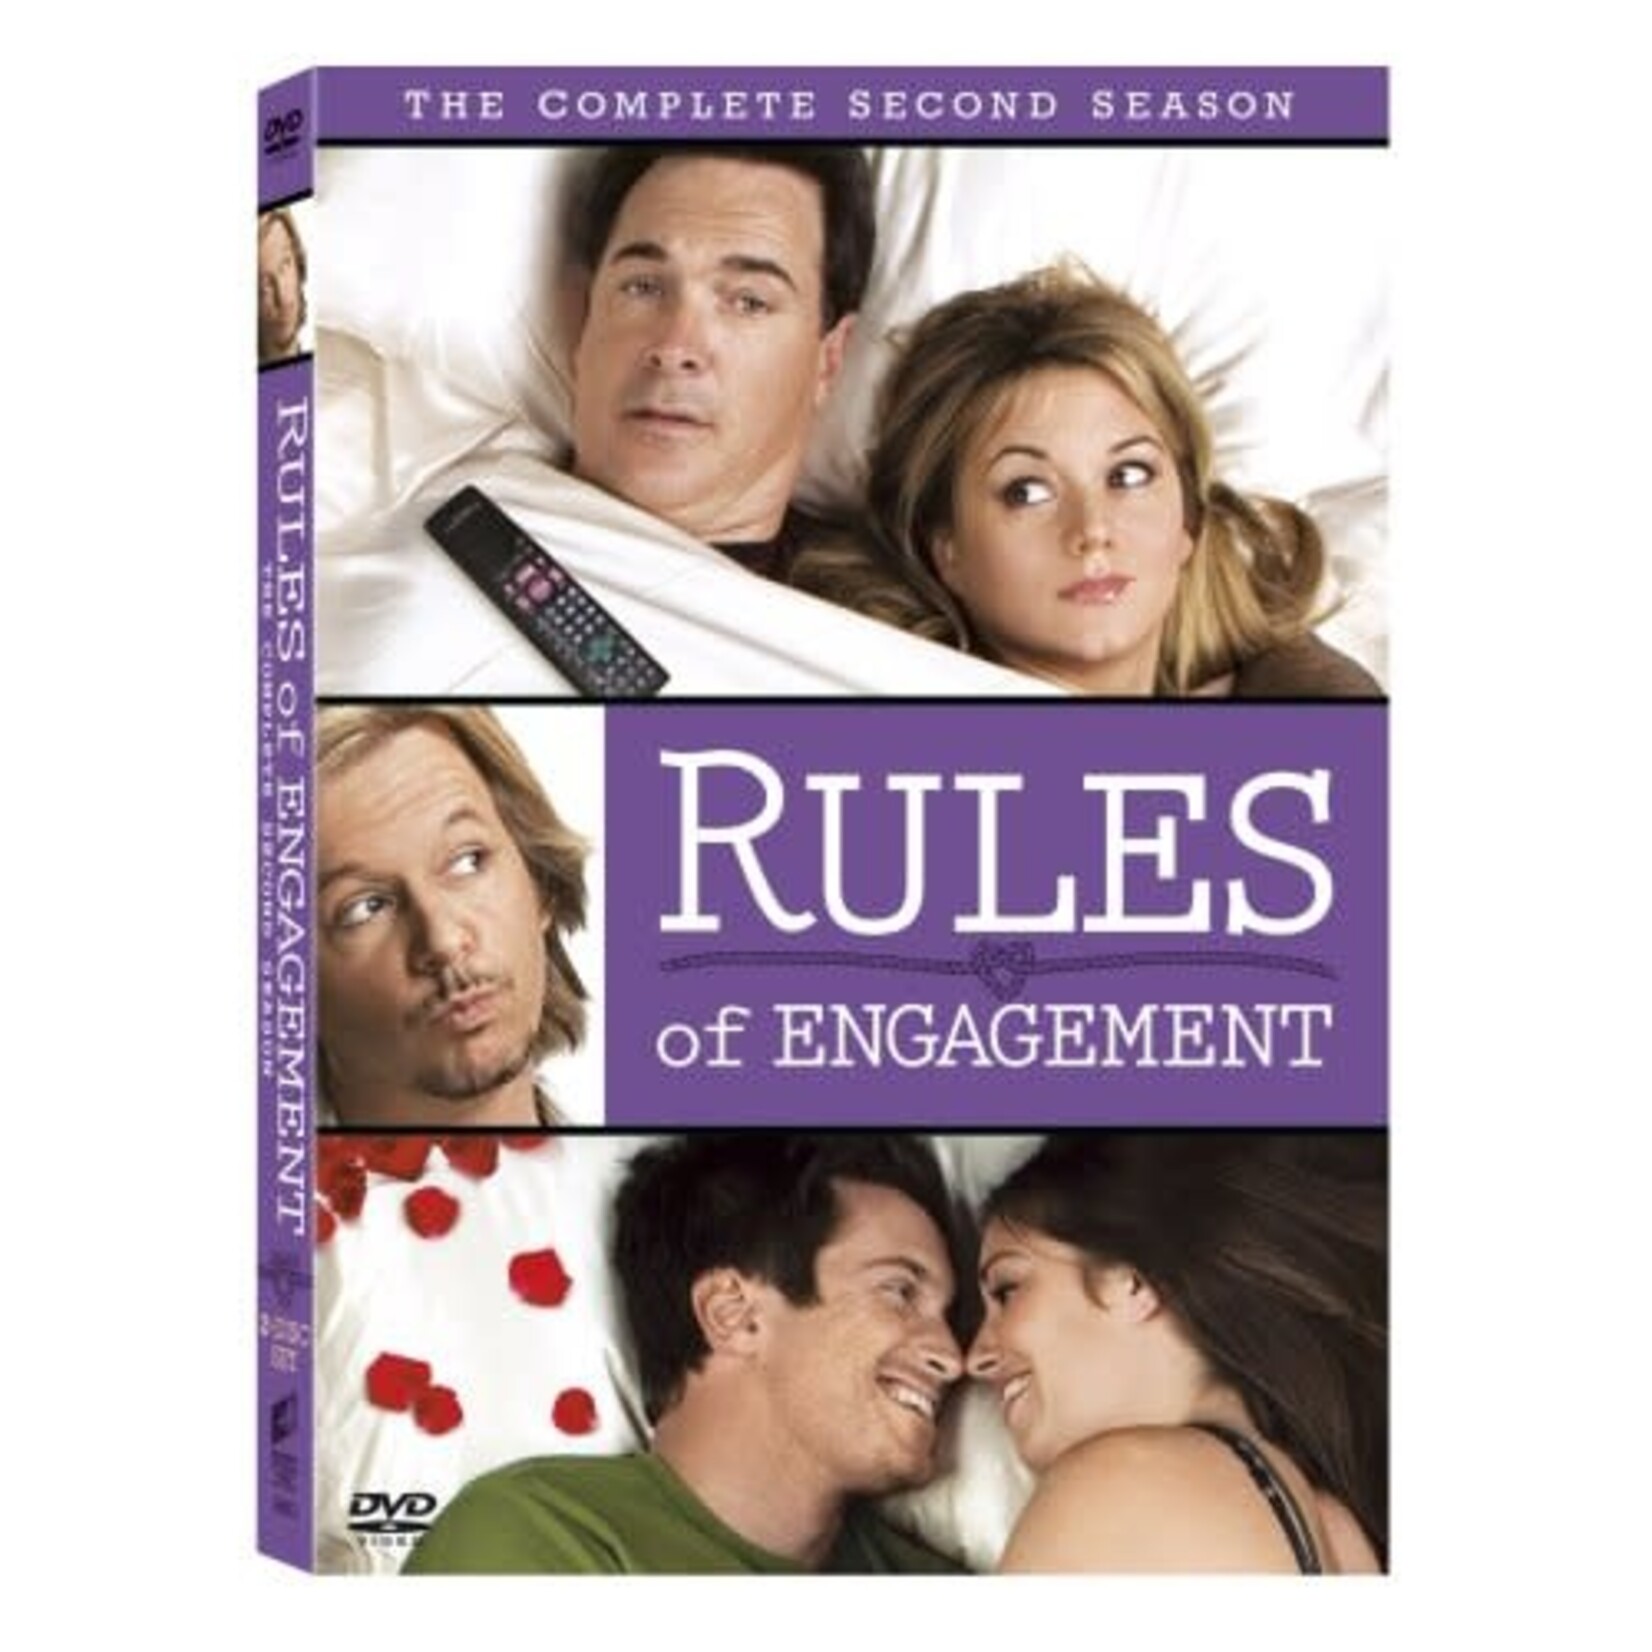 Rules Of Engagement - Season 2 [USED DVD]